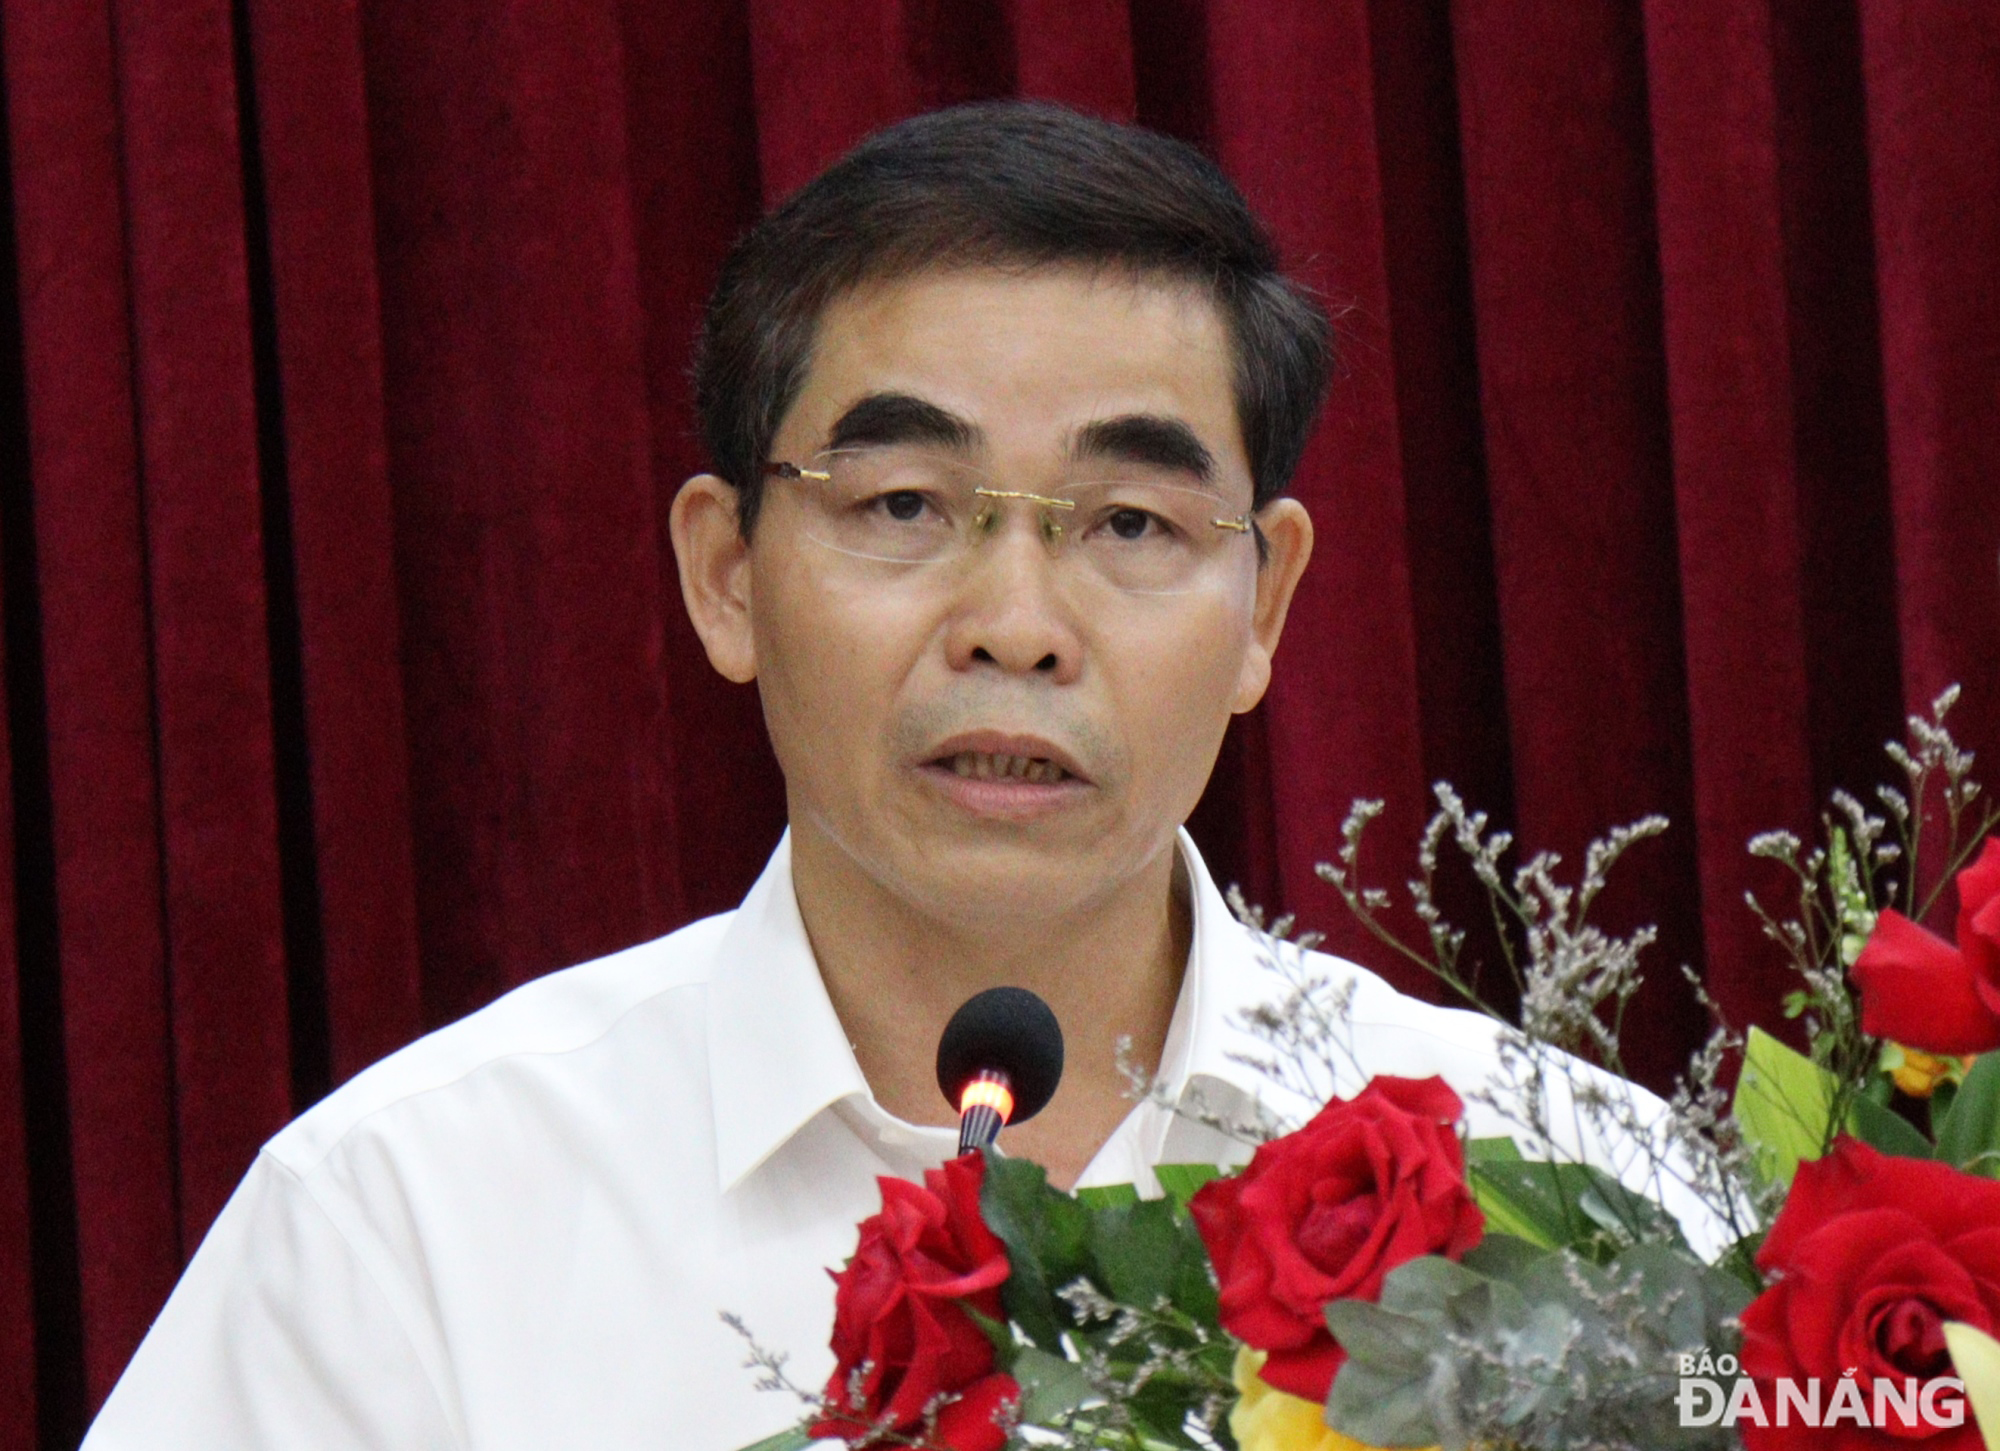 Chairman of Hoa Vang District People's Committee Phan Van Ton pledged to create the most favourable conditions for investors to implement local projects effectively. Photo: HOANG HIEP